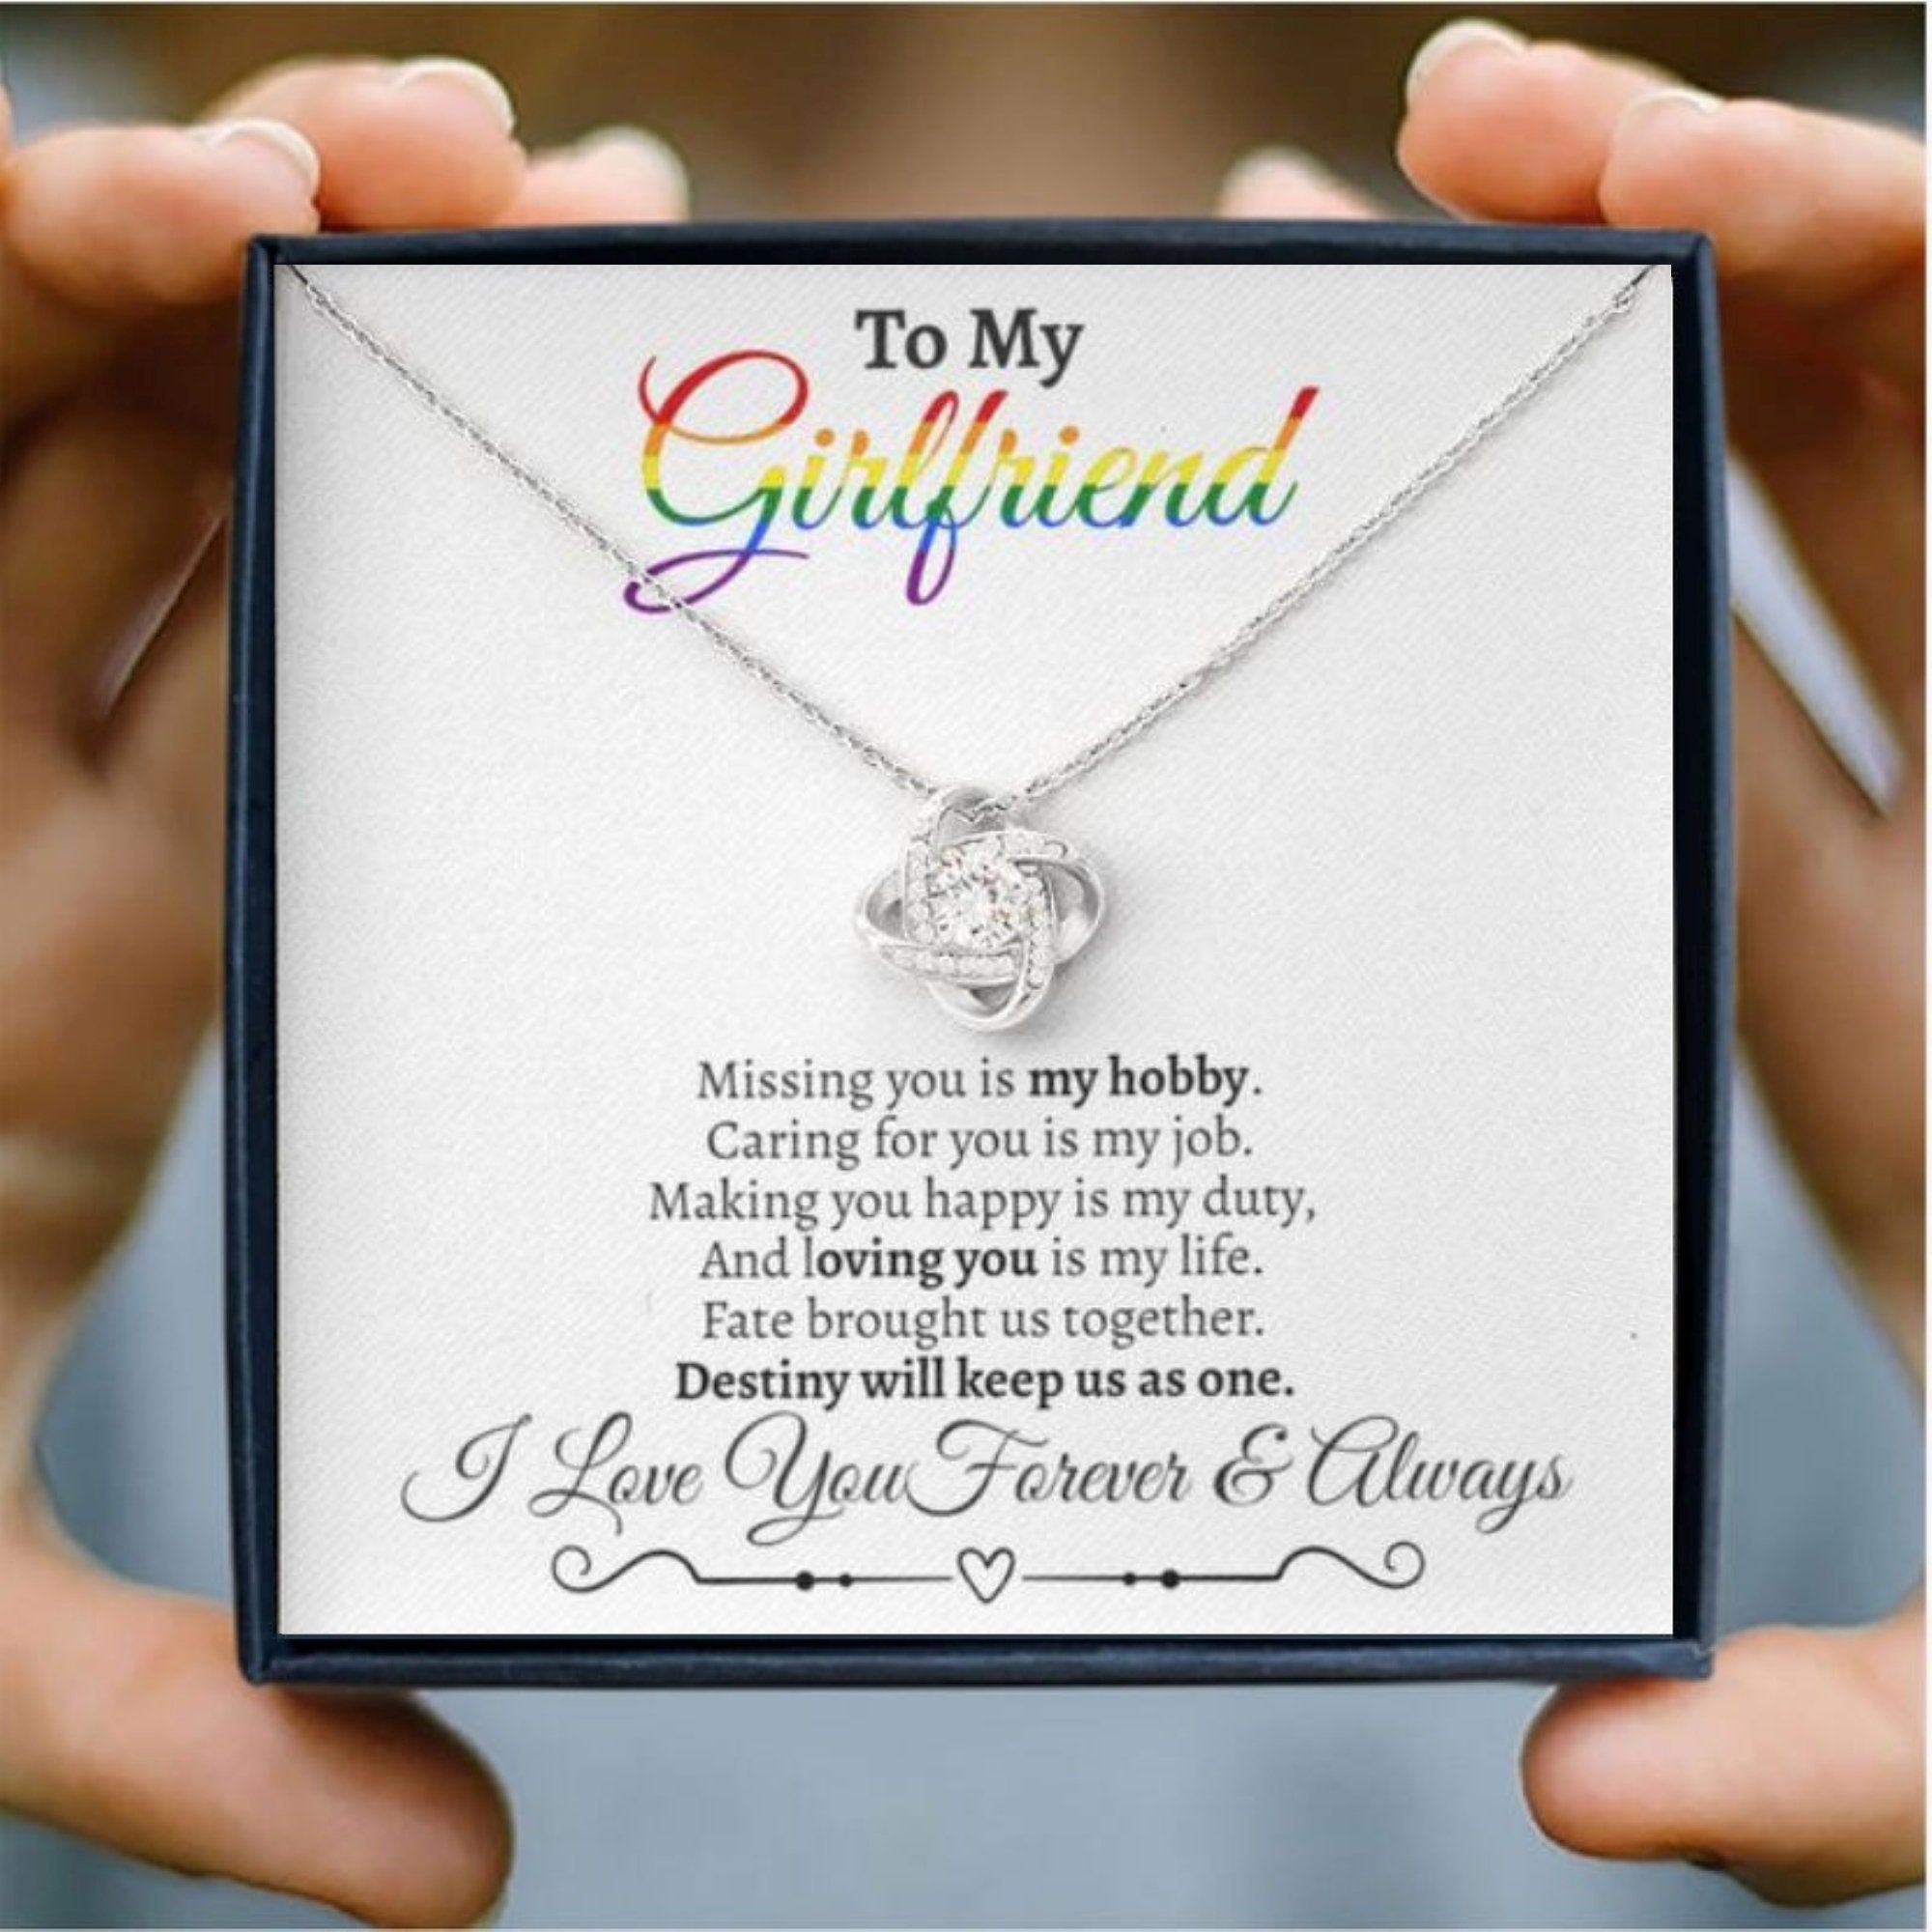 Anavia Mother's Day Gift for Girlfriend, Girlfriend Birthday Gift, Heart  Necklace, Necklace for Girlfriend, Gifts for Girlfriend, Anniversary Gift,  Gift for Mom - [Rose Gold] - Walmart.com